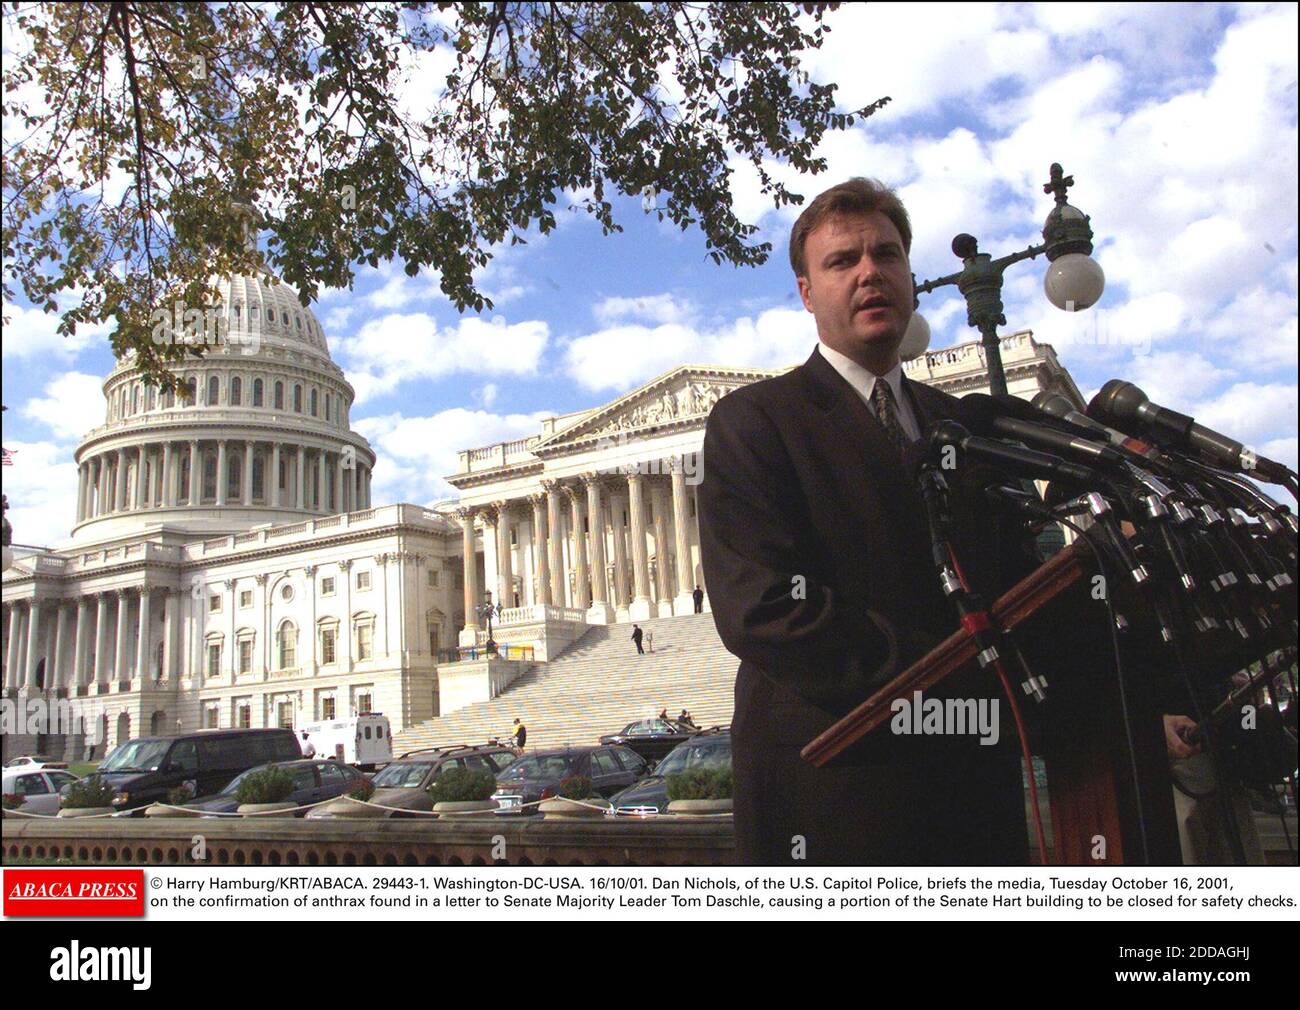 NO FILM, NO VIDEO, NO TV, NO DOCUMENTARY - © Harry Hamburg/KRT/ABACA. 29443-1. Washington-DC-USA. 16/10/01. Dan Nichols, of the U.S. Capitol Police, briefs the media, Tuesday October 16, 2001, on the confirmation of anthrax found in a letter to Senate Majority Leader Tom Daschle, causing a portion Stock Photo